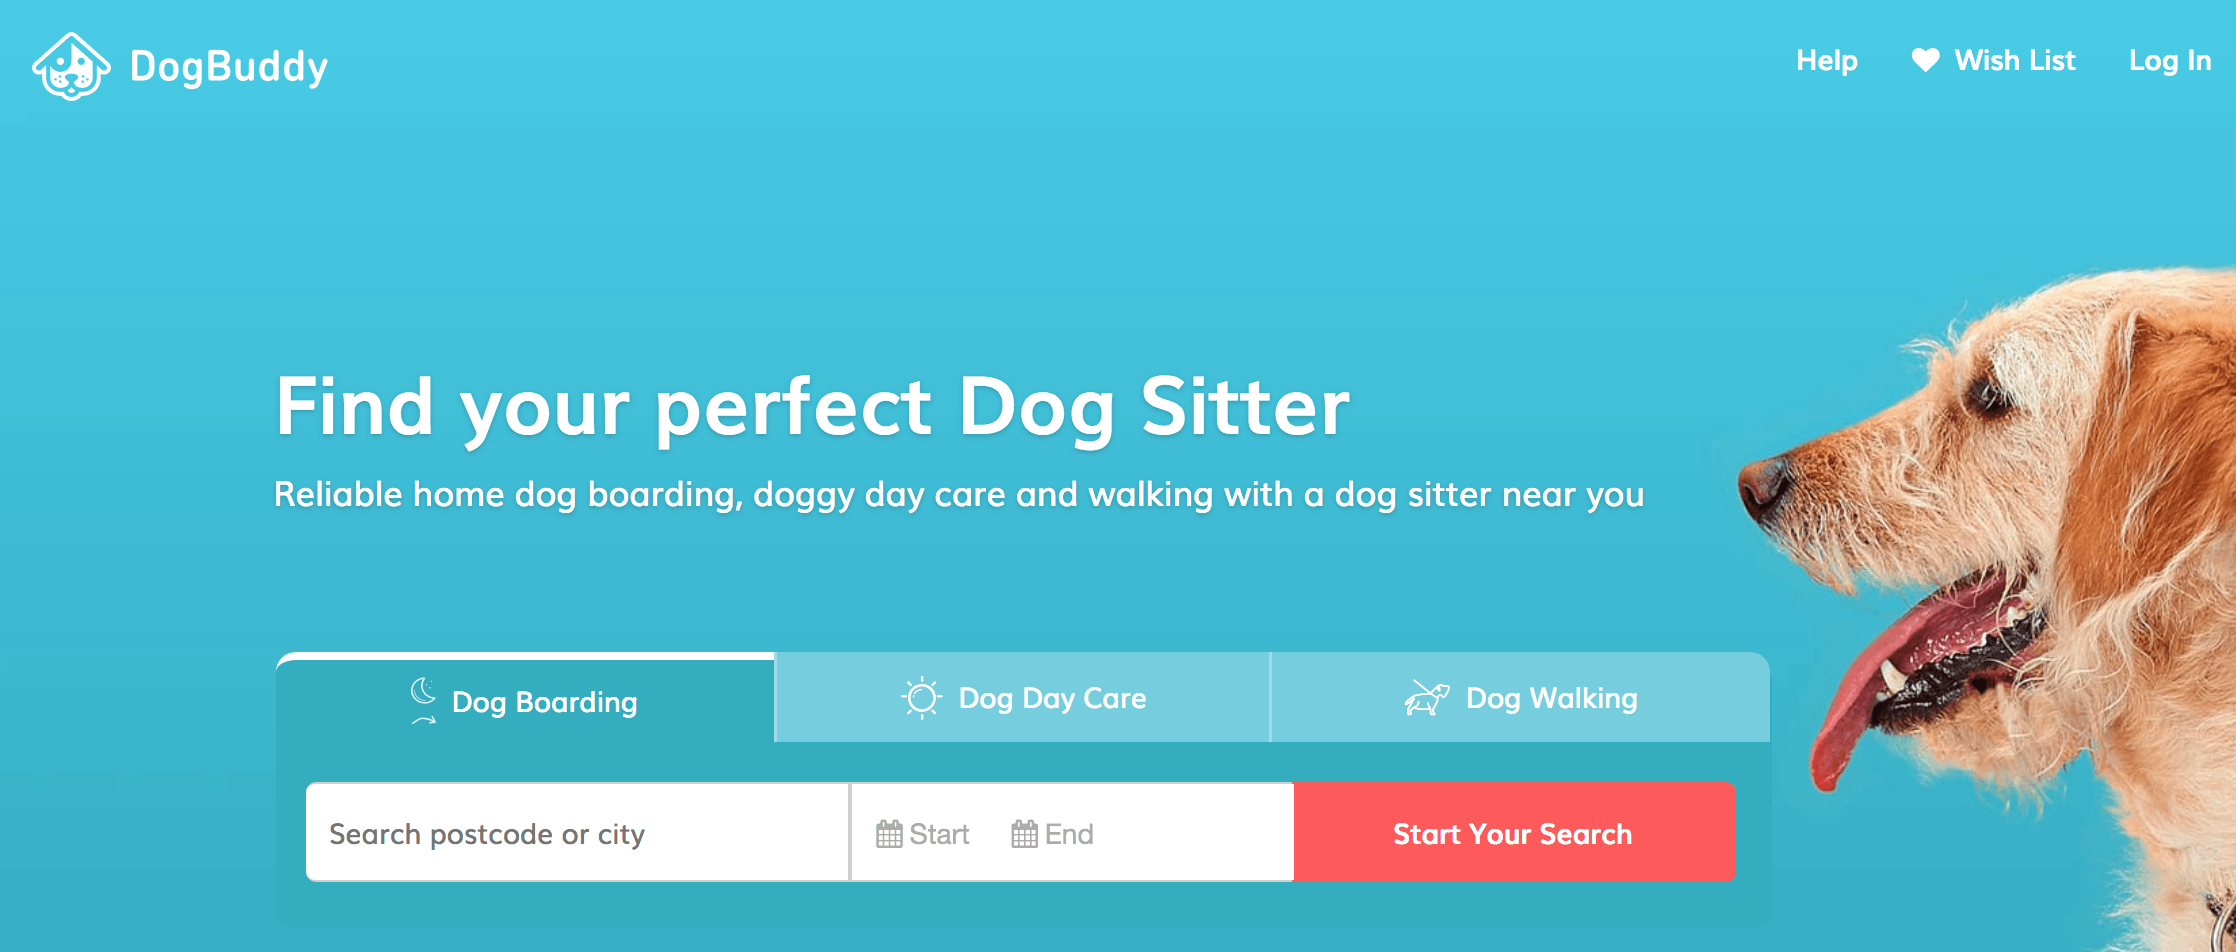 Rover Dog Sitting Logo - Pet care company Rover aims to boost growth in Europe, acquiring UK ...